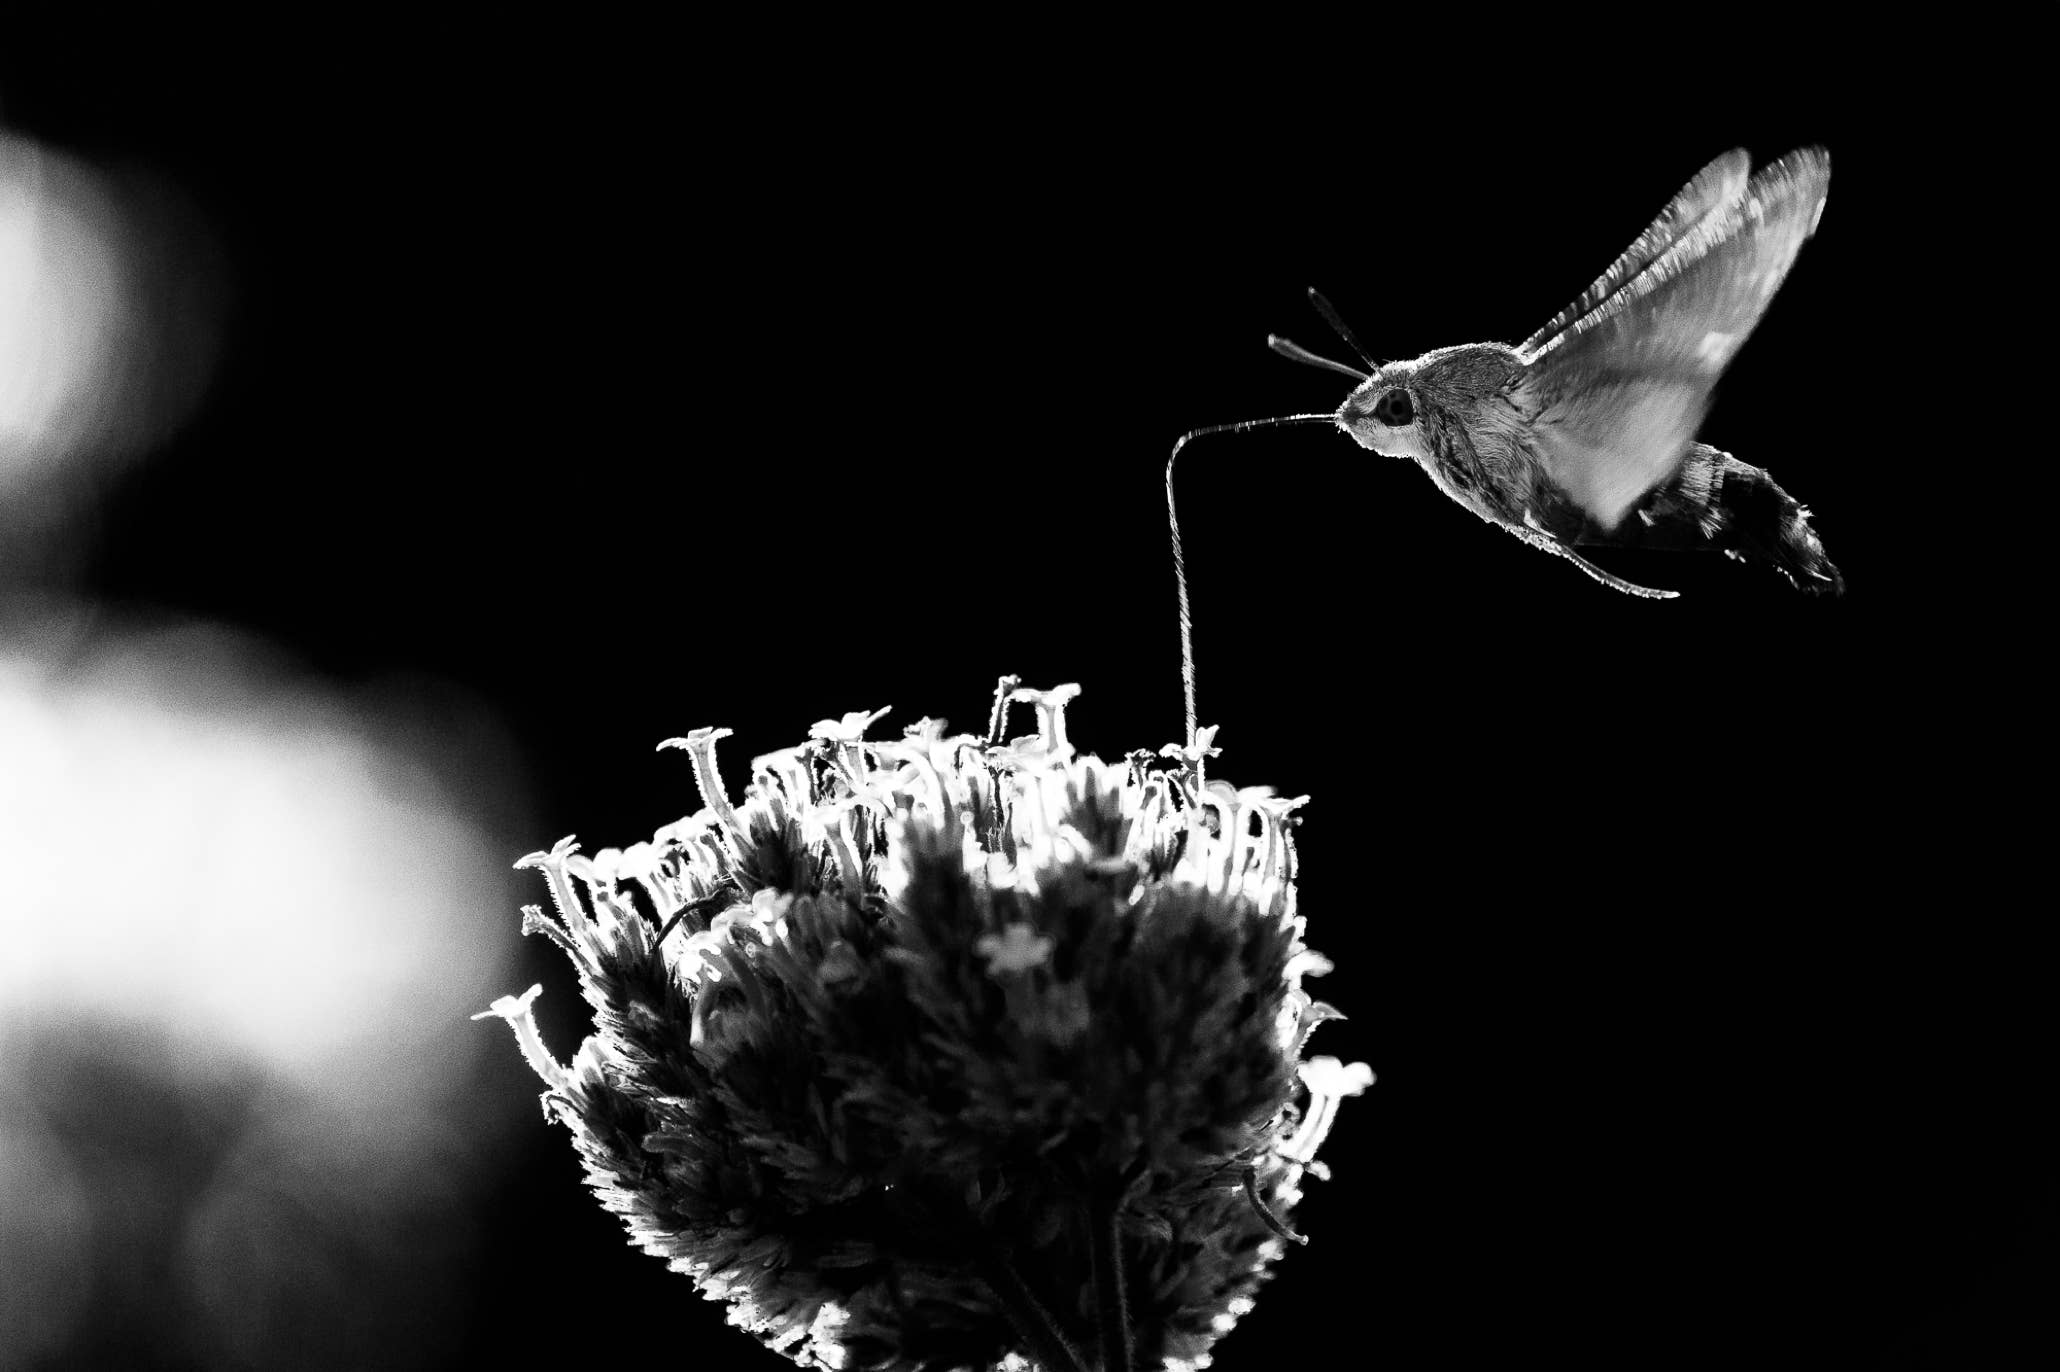 nature, oretail photography, olivier retail, noir et blanc, black and white, nature, wildlife, faune sauvage, papillon, butterfly, sphinx colibri